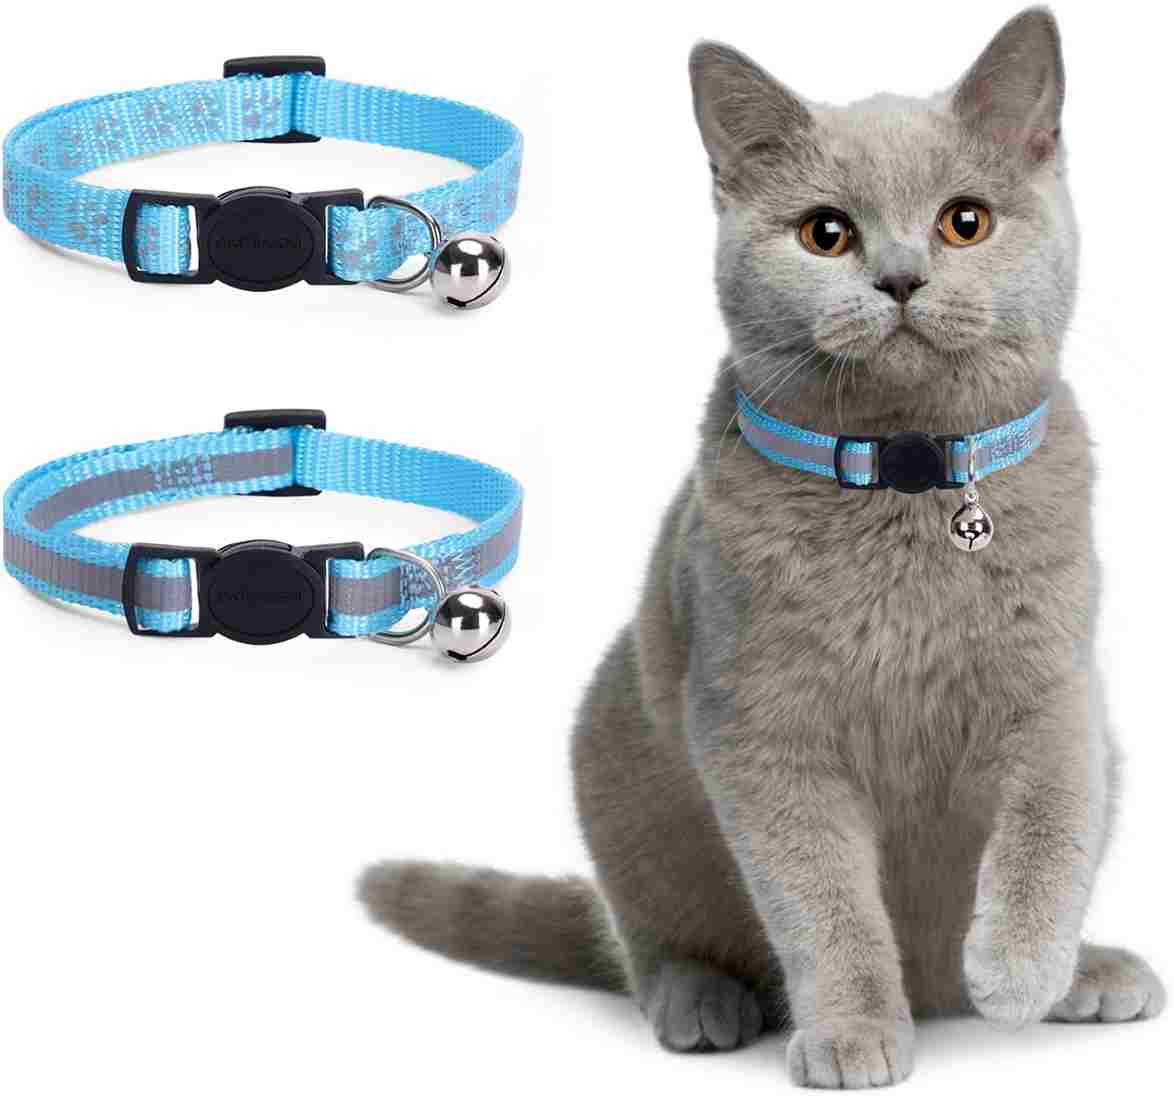 Nobleza Kitten Collar with Bell, 2 Pack Breakaway Cat Collars with Safe Quick Release Buckle, Paw Print & Strip Reflective Adjustable Soft Pet Collar for Small Medium Kitty Cats